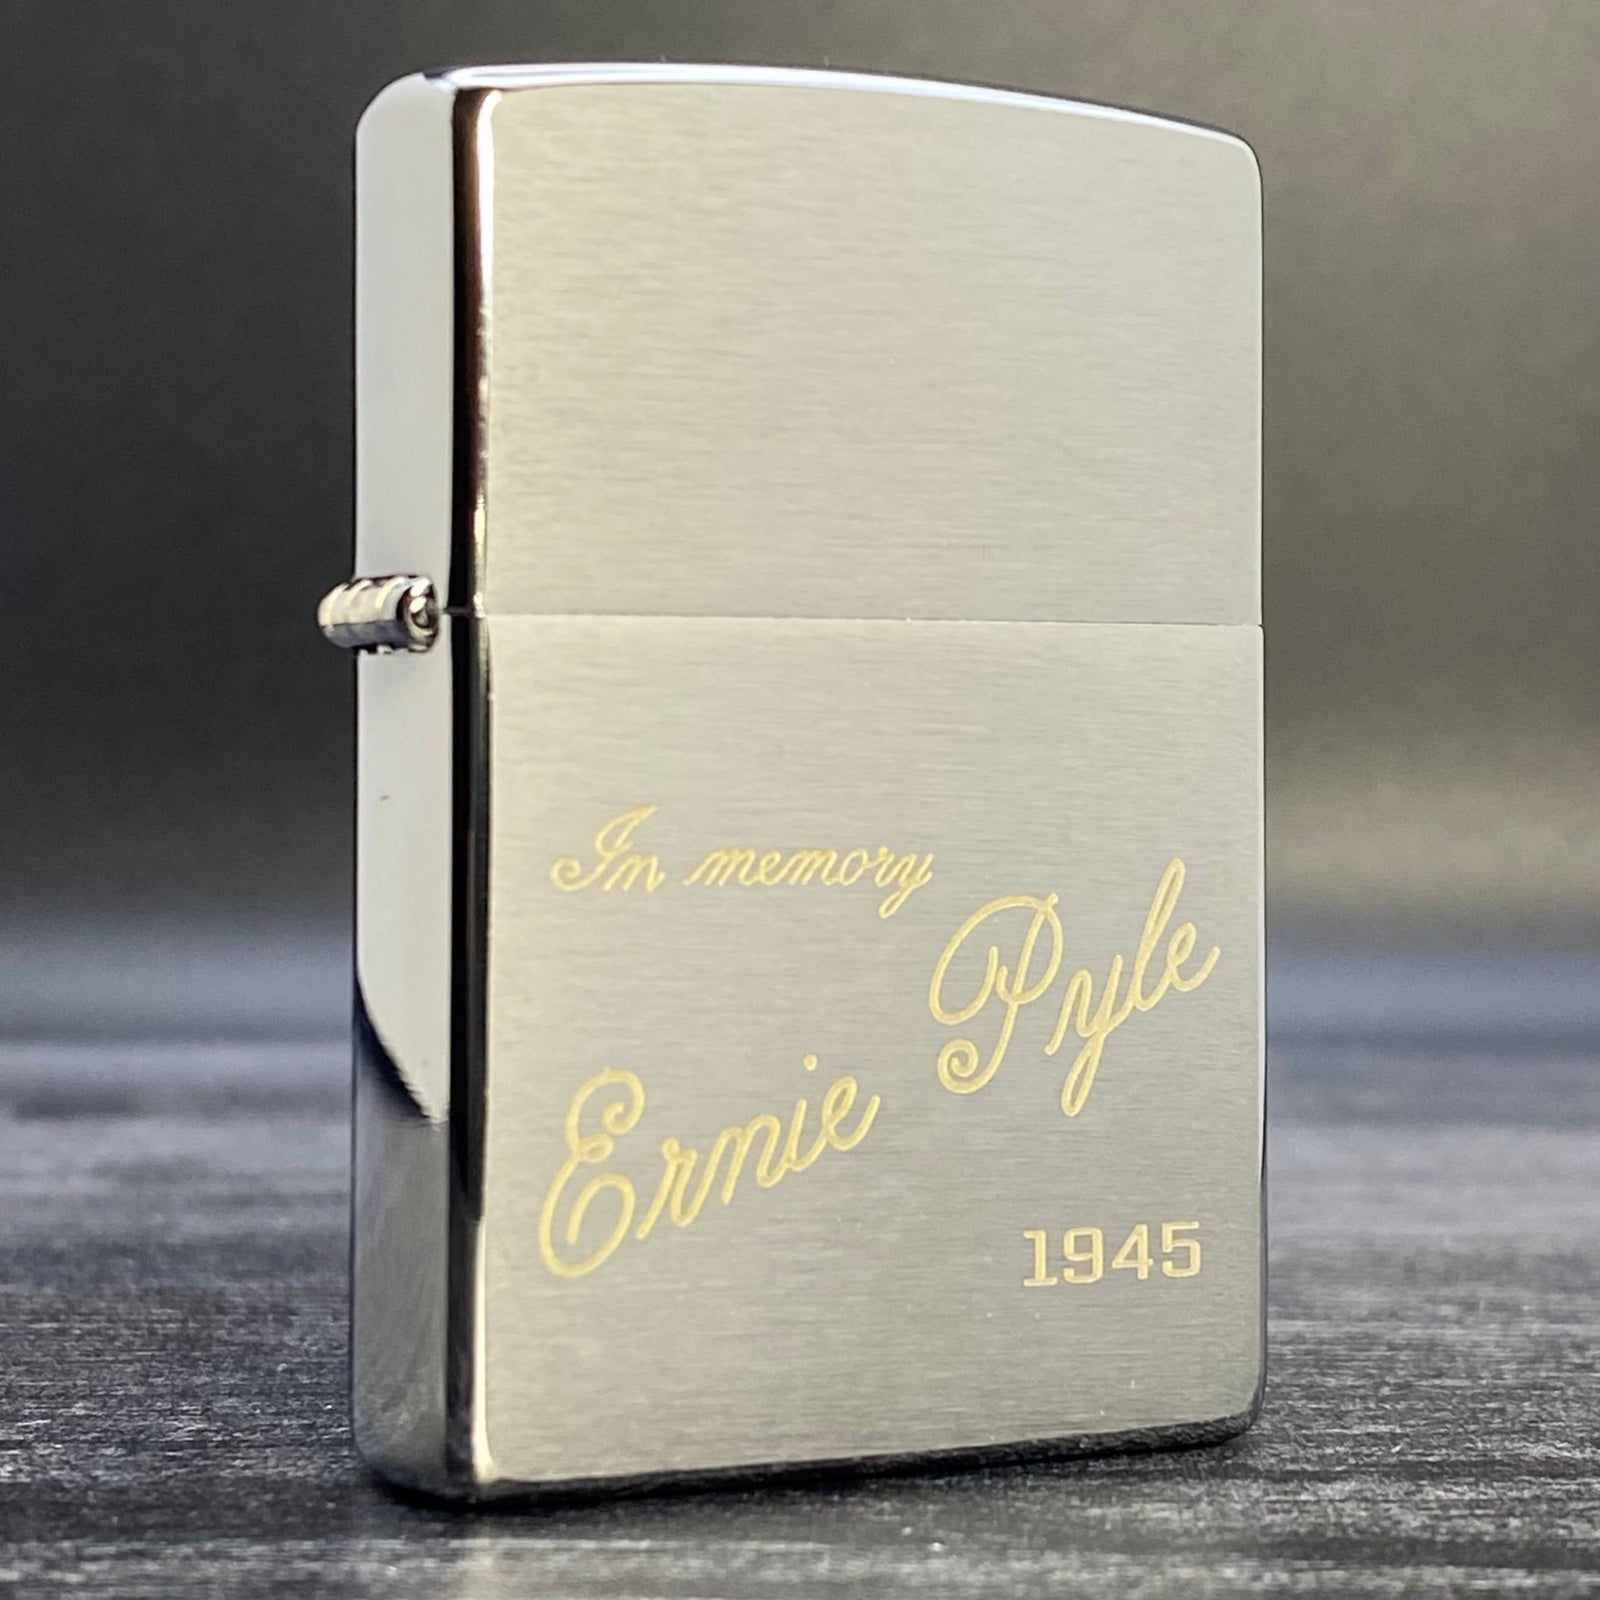 EXCLUSIVE - ZIPPO LIGHTER - Ernie Pyle Tribute - Brushed Chrome - Riley's 66 LLC